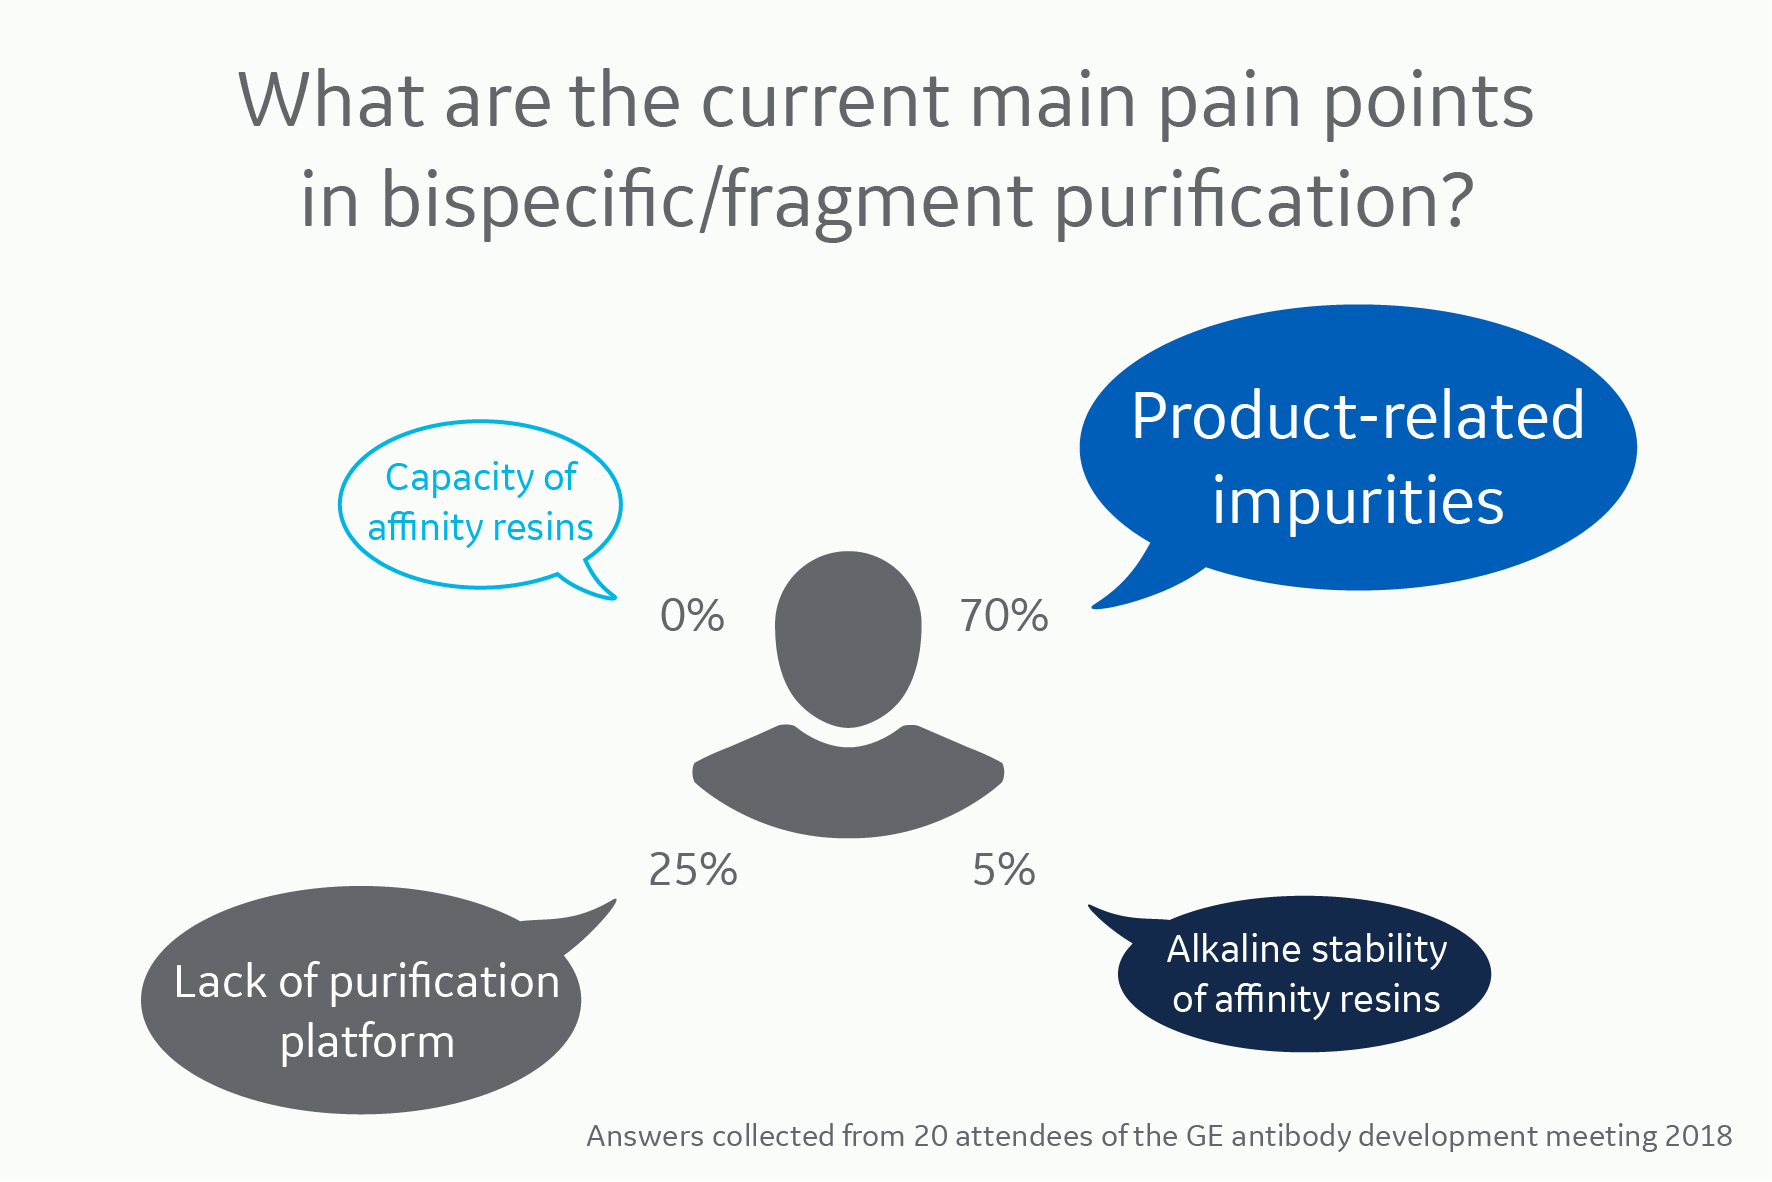 Survey results for downstream process developers’ pain points in purification of bispecific antibodies